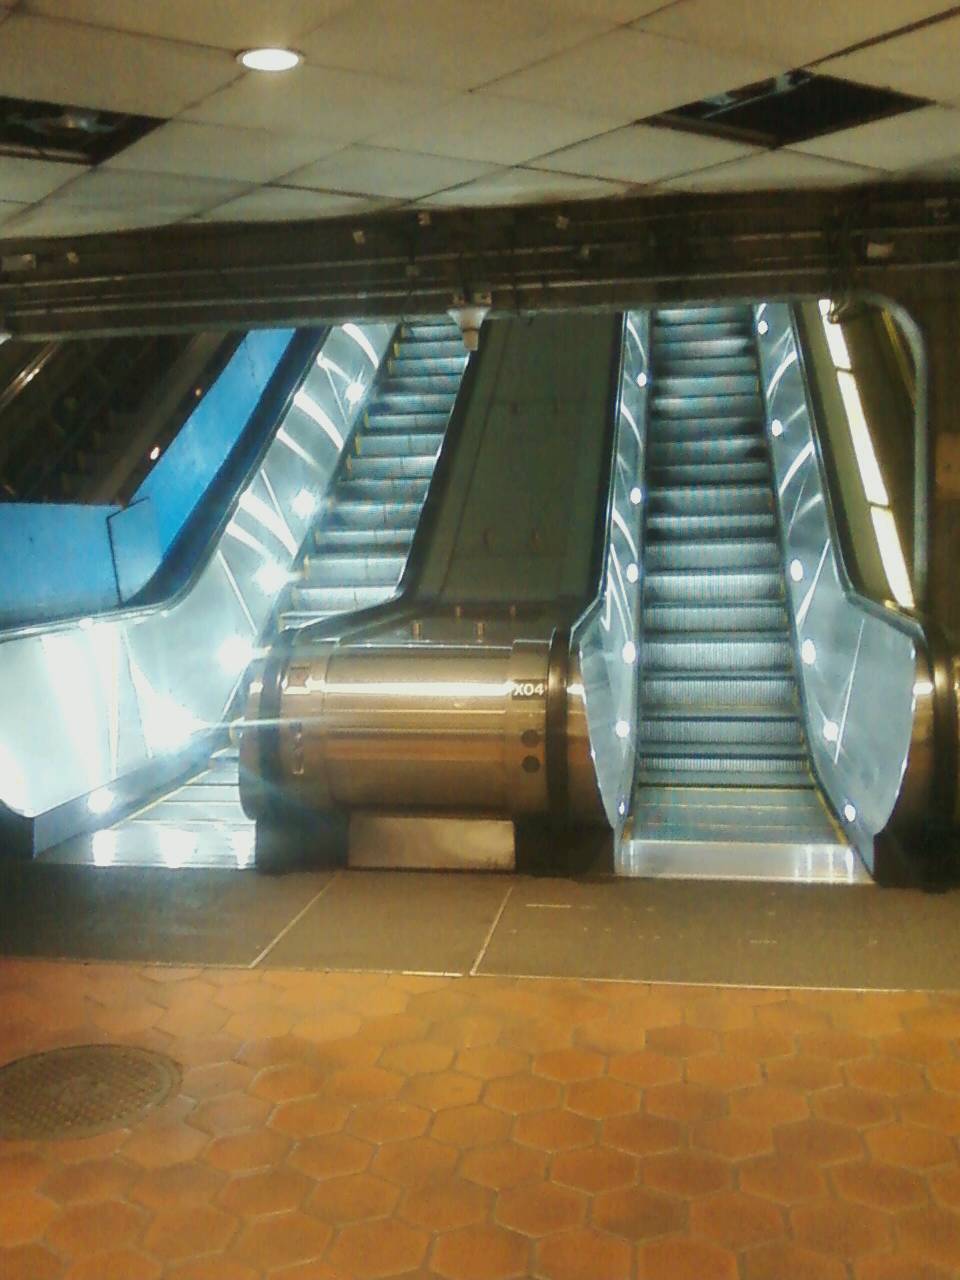 01/03/2017- WMATA/DC Van Ness/UDC escalator heading up is out of
service, causing passengers to walk up a very long way. The down escalator
is working fine...couldn't someone have bothered to switch the two?? For
further details, please visit www.wirelessnotes.org.